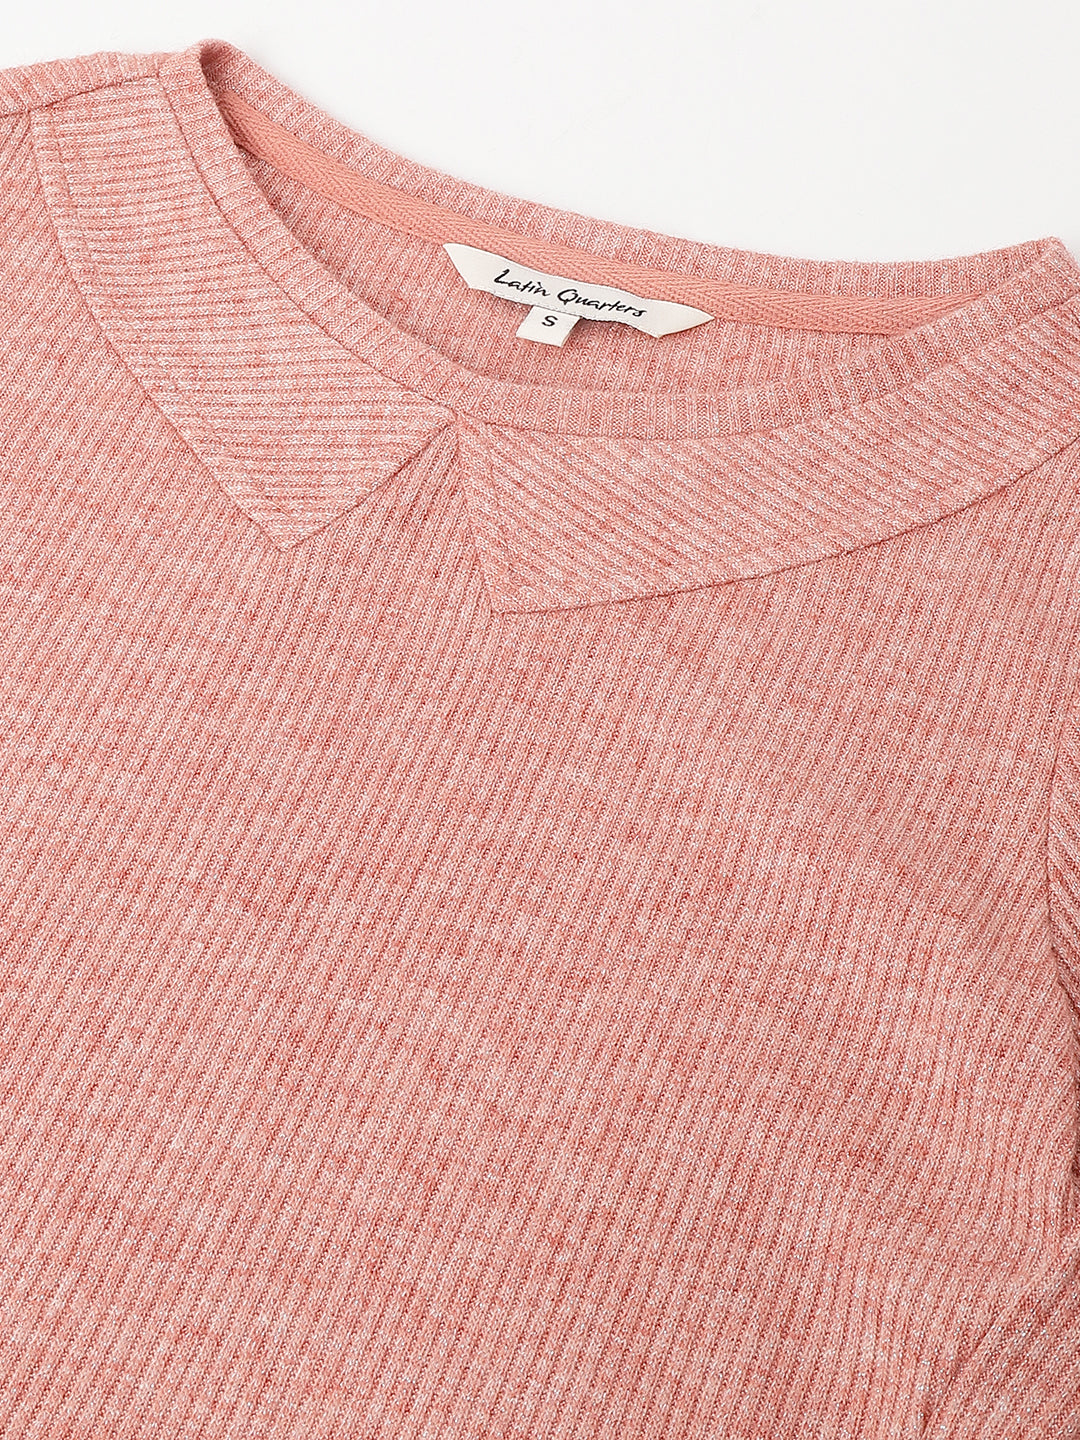 Peach Full Sleeve Solid Knit Top